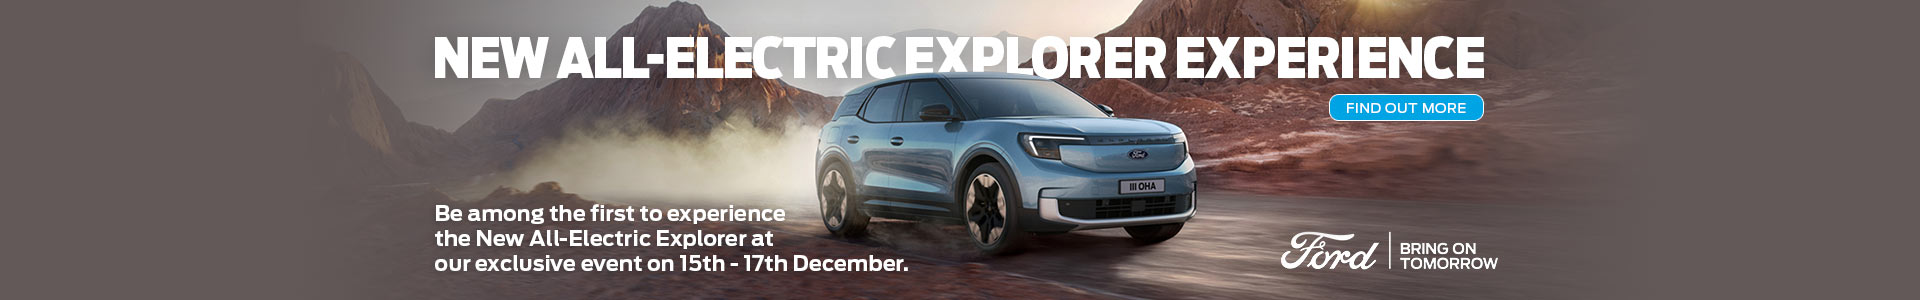 New All-Electric Explorer Experience book your spot now! 